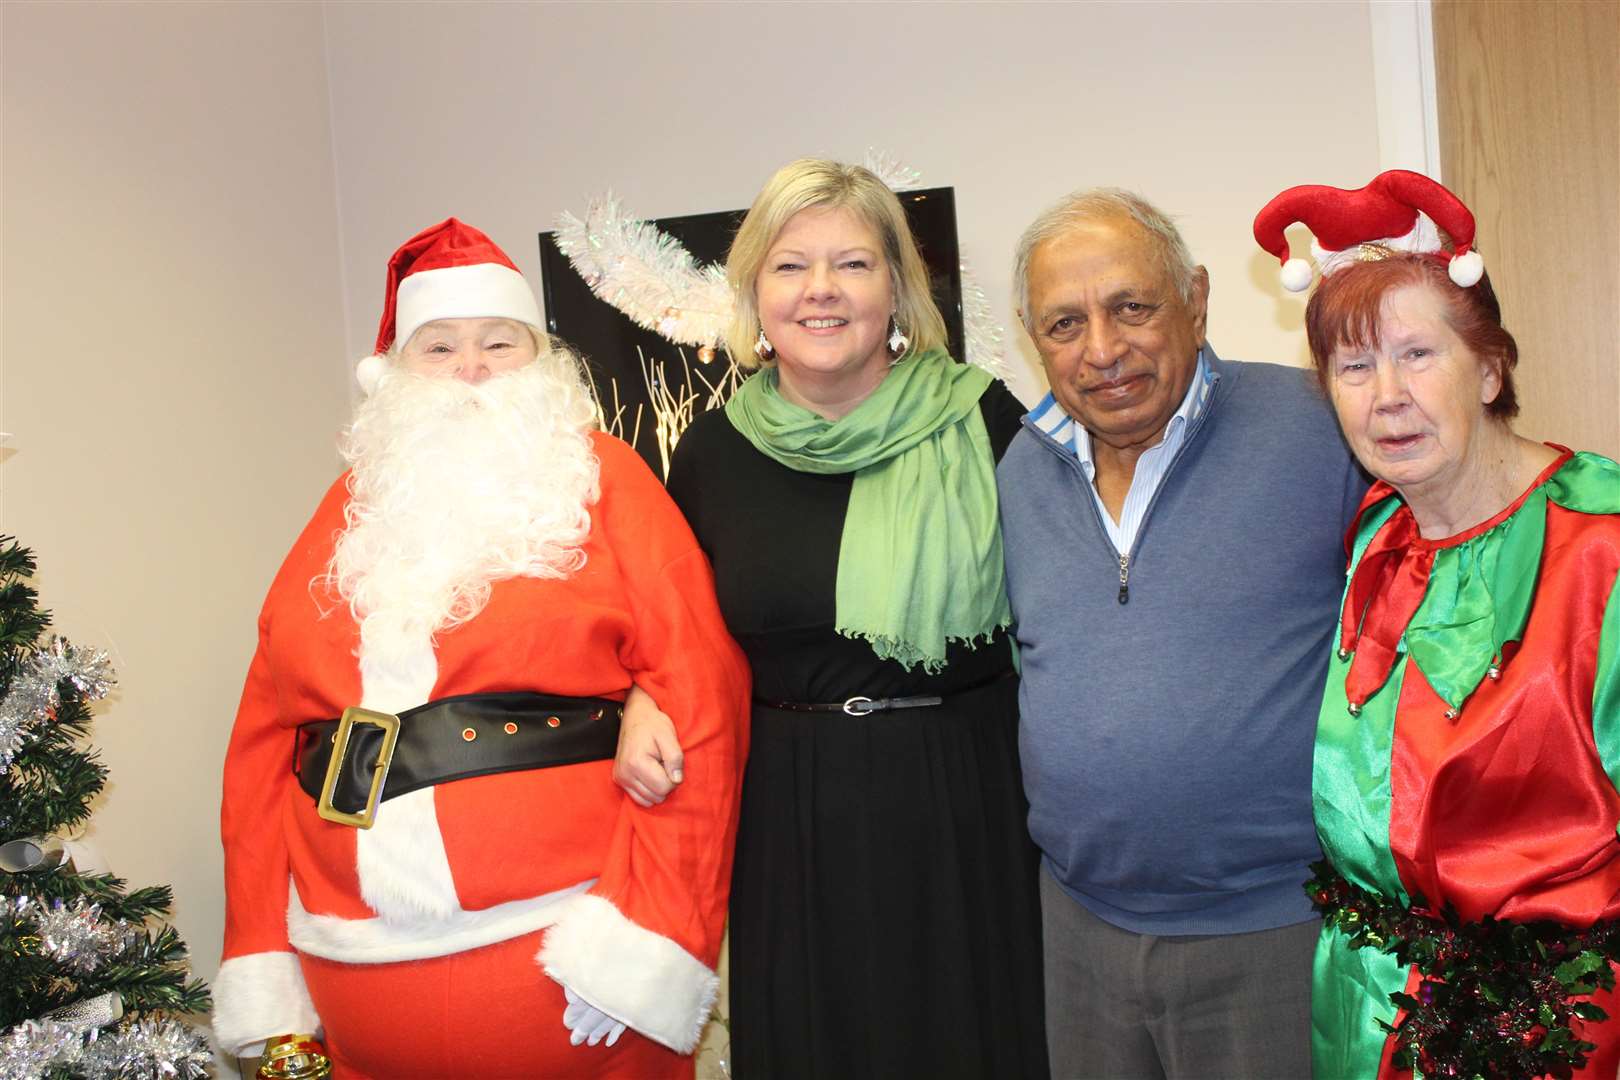 Mrs Santa (alias Yvonne Gordon) and her helper elf Kathy Coutts welcomed visitors Provost Judy Whyte and Pushp Vaid to her grotto at GO premises at West High Street, Inverurie on Saturday. Picture: Griselda McGregor